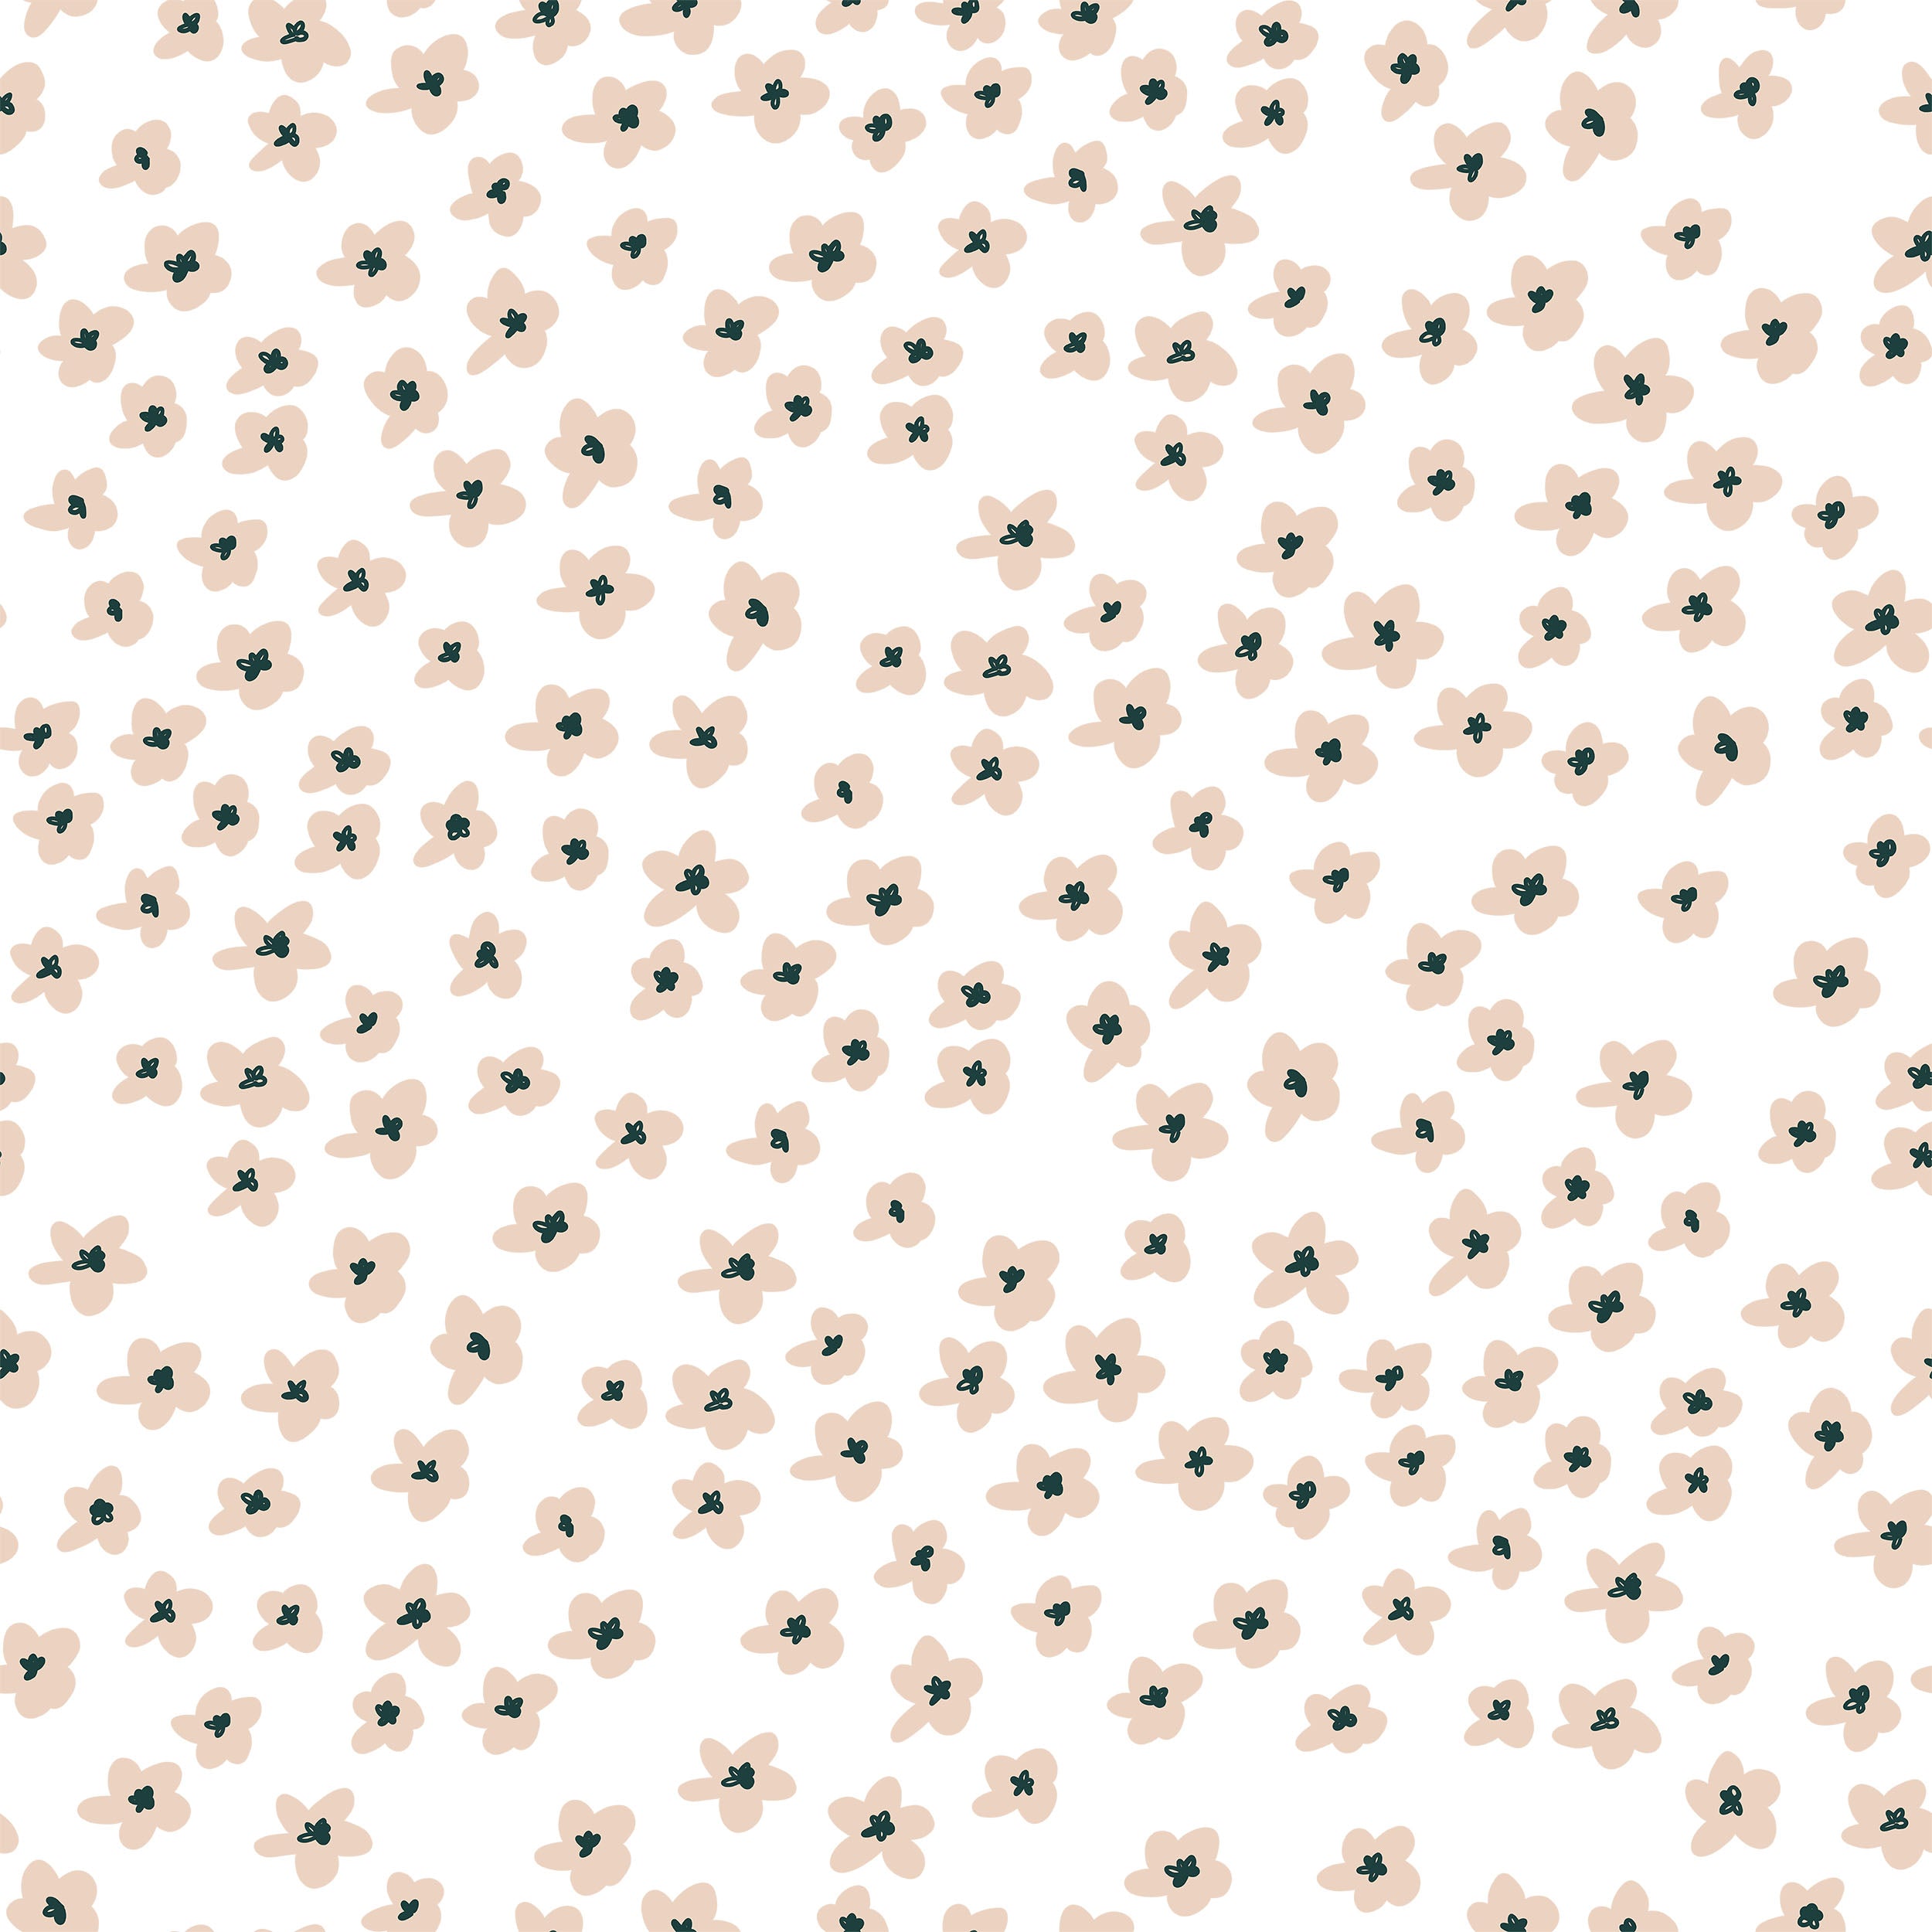 Close-up of the Simple Meadow Wallpaper, showcasing a repeated pattern of small flowers with black centers and peach petals on a white background, giving a fresh and delicate look.